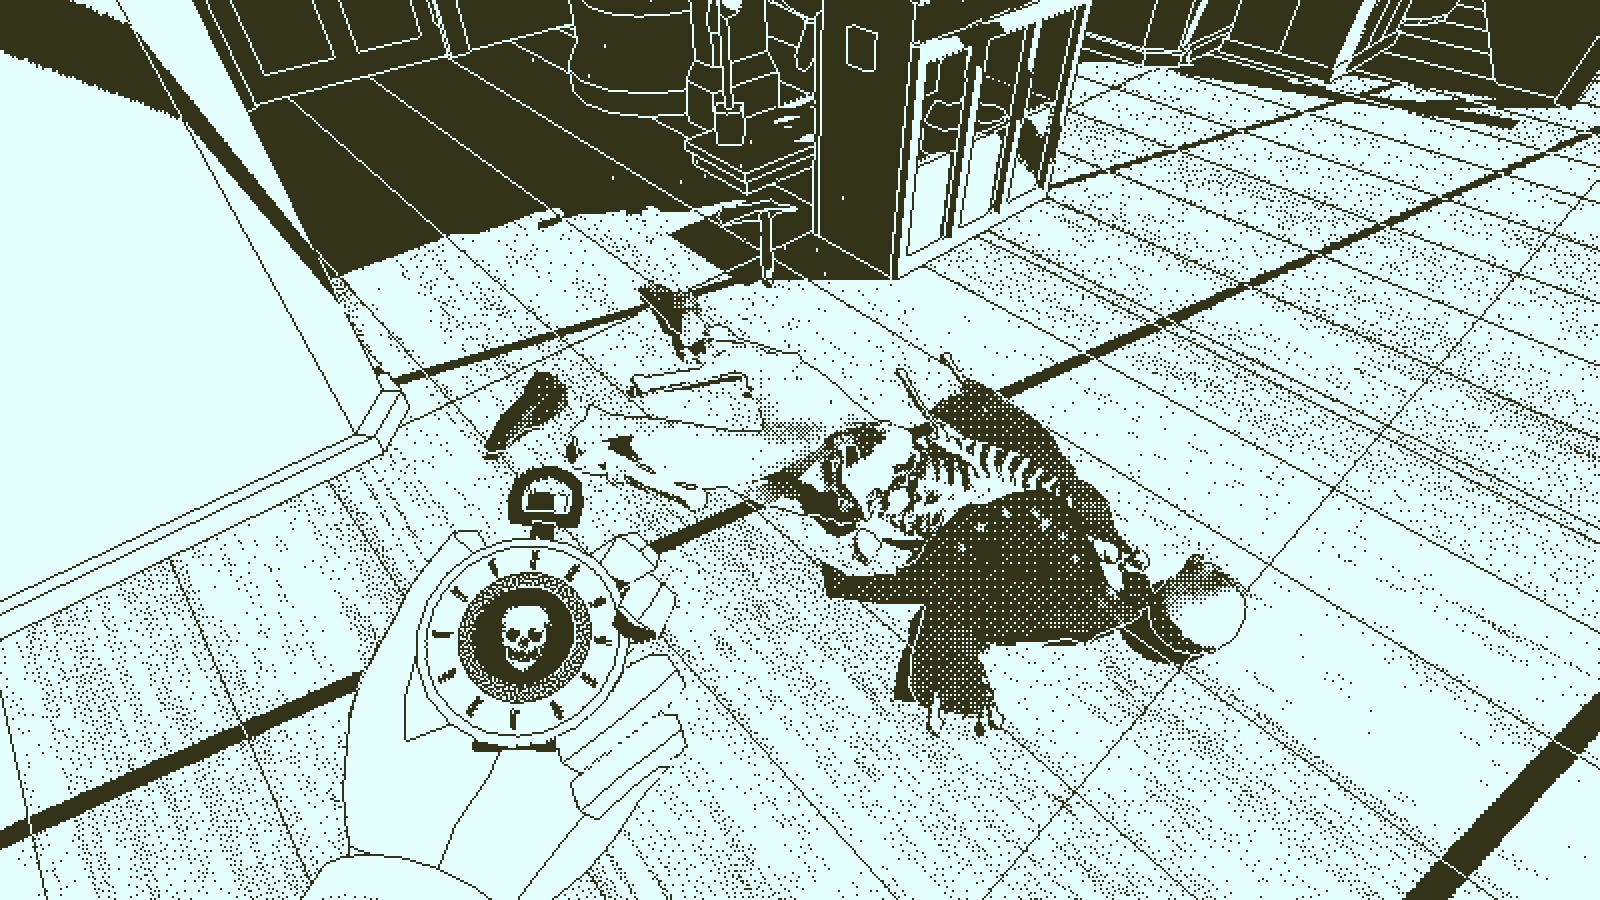 Looking at a skeleton in a screenshot from Return of the Obra Dinn.